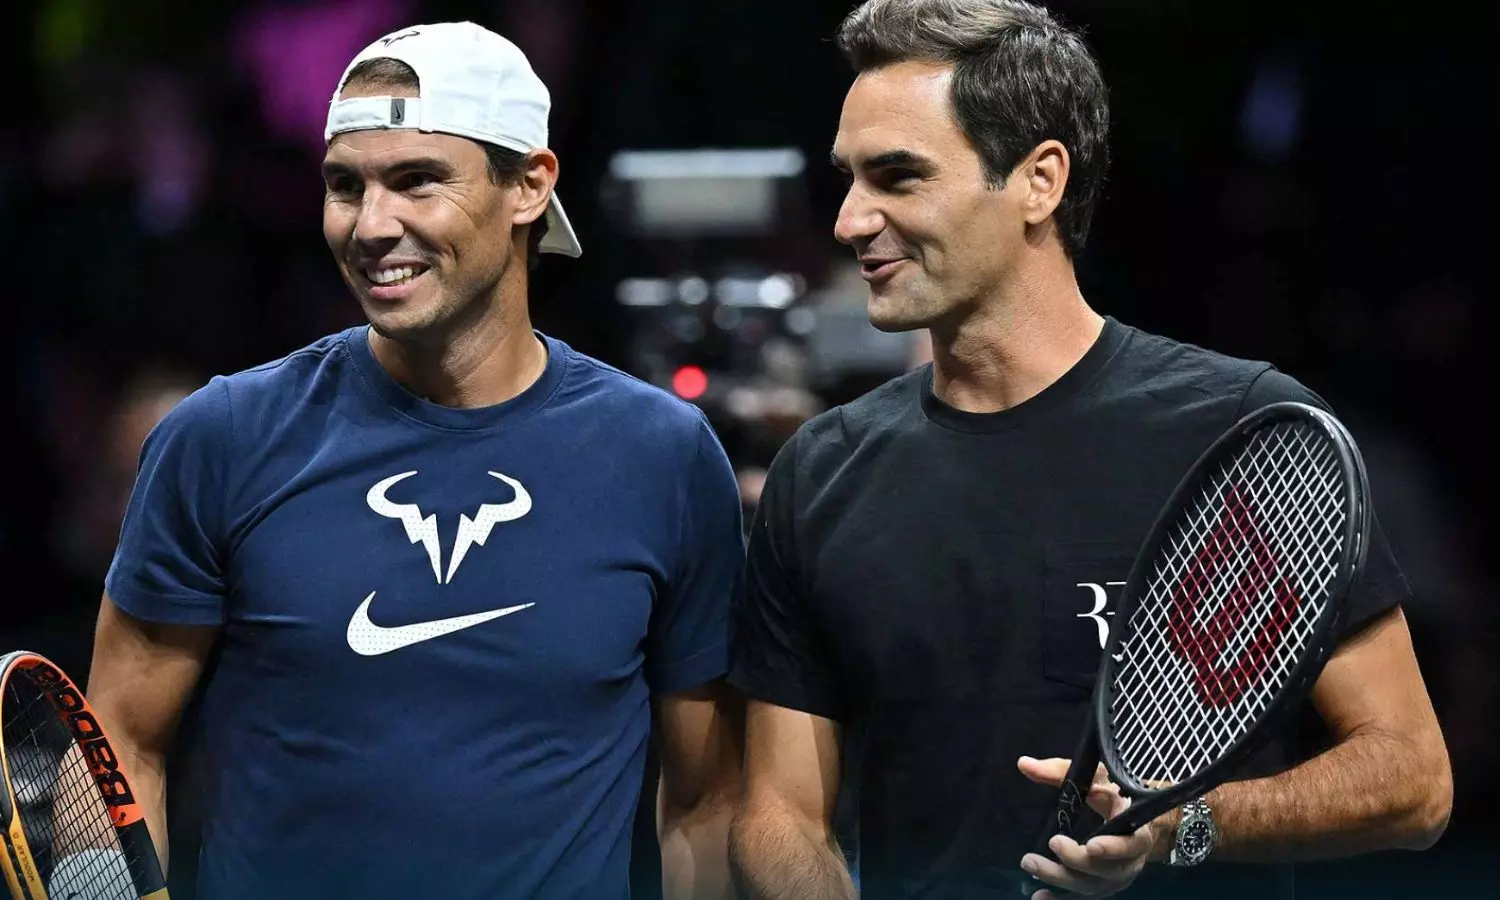 Federers final match comes in doubles alongside rival Nadal at Laver Cup